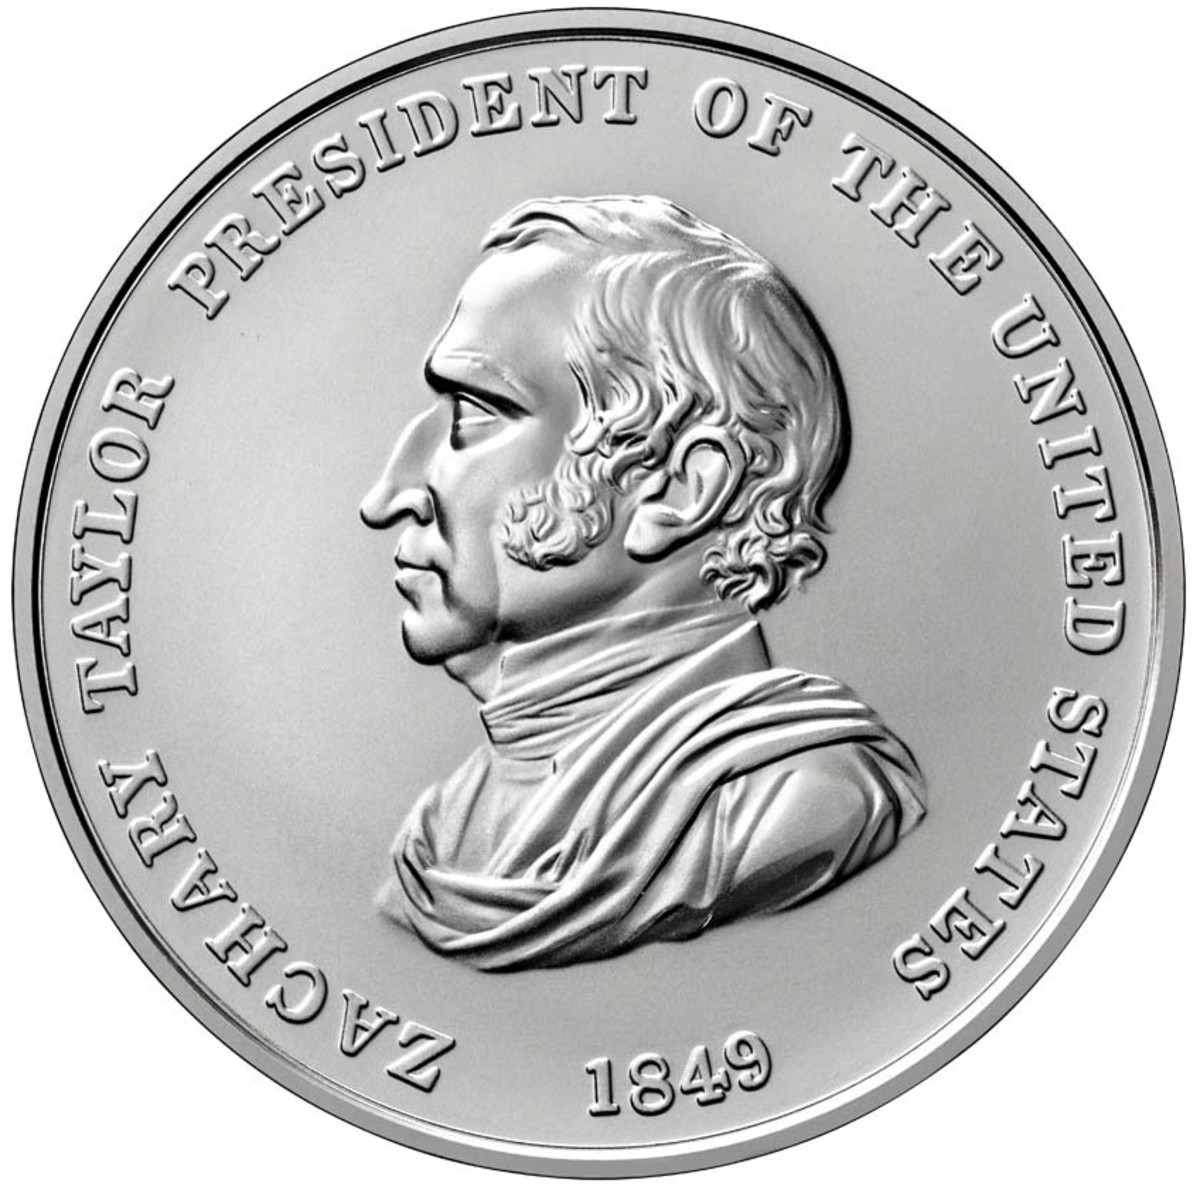 Zachary Taylor silver Presidential medal. (Image courtesy United States Mint.)